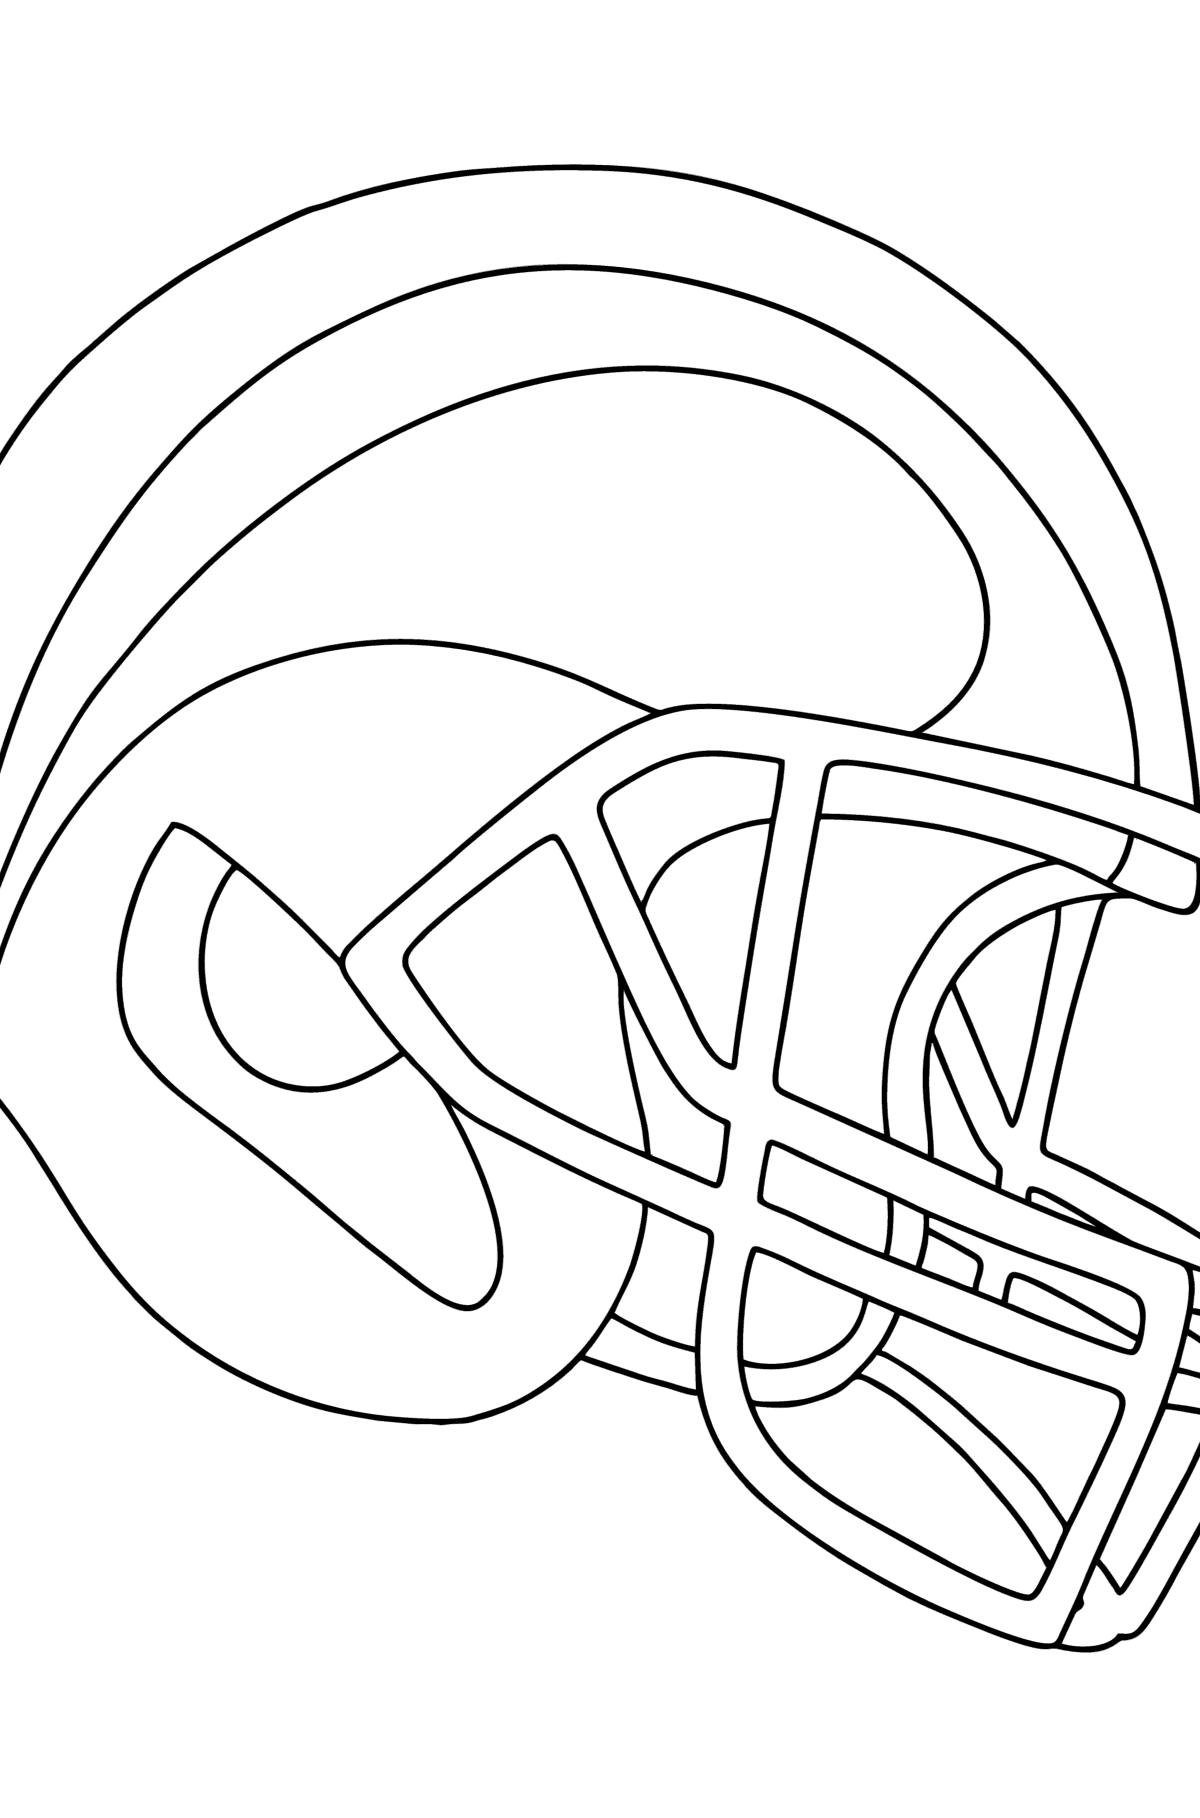 NFL Safety Helmet сolouring page - Coloring Pages for Kids